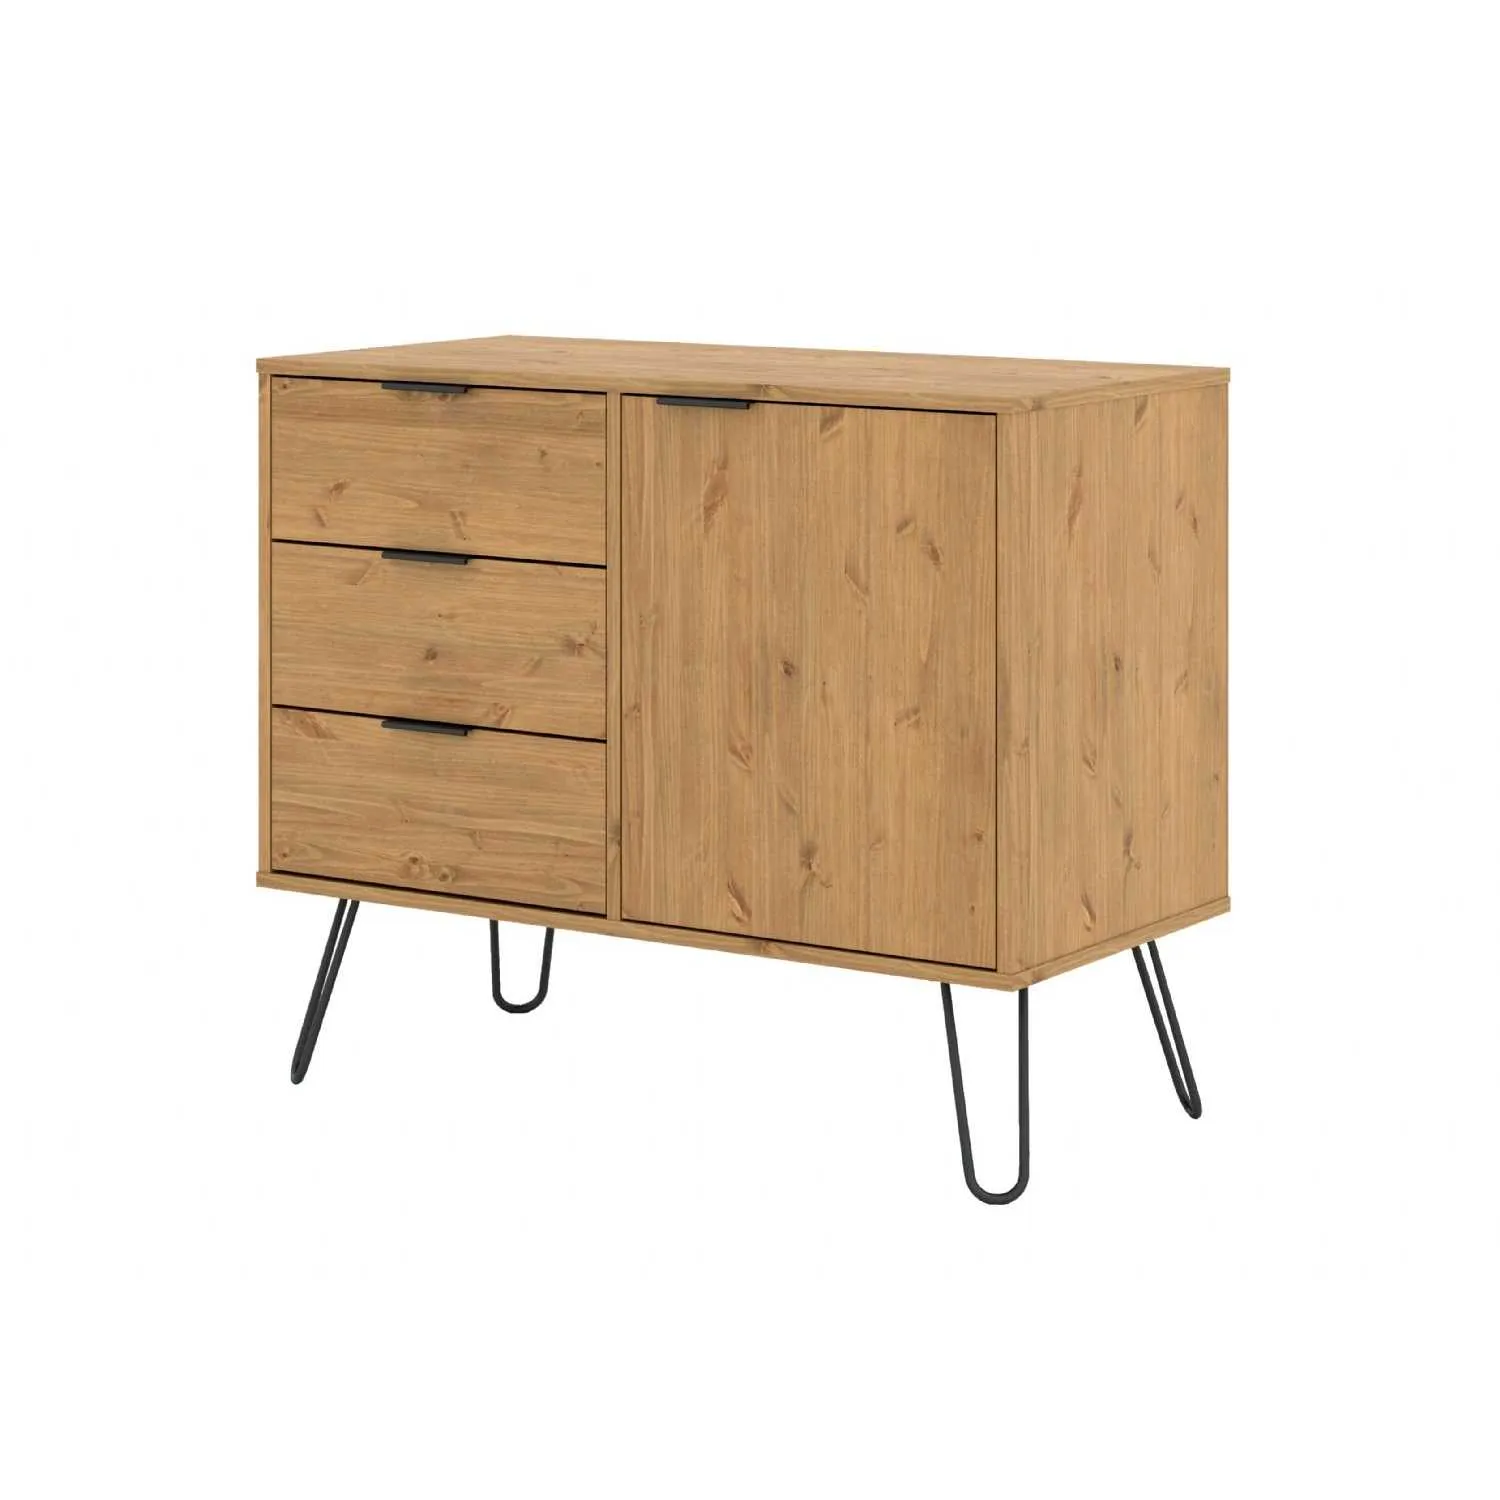 Small Pine Sideboard Cupboard with 1 Door and 3 Drawers Metal Hairpin Legs